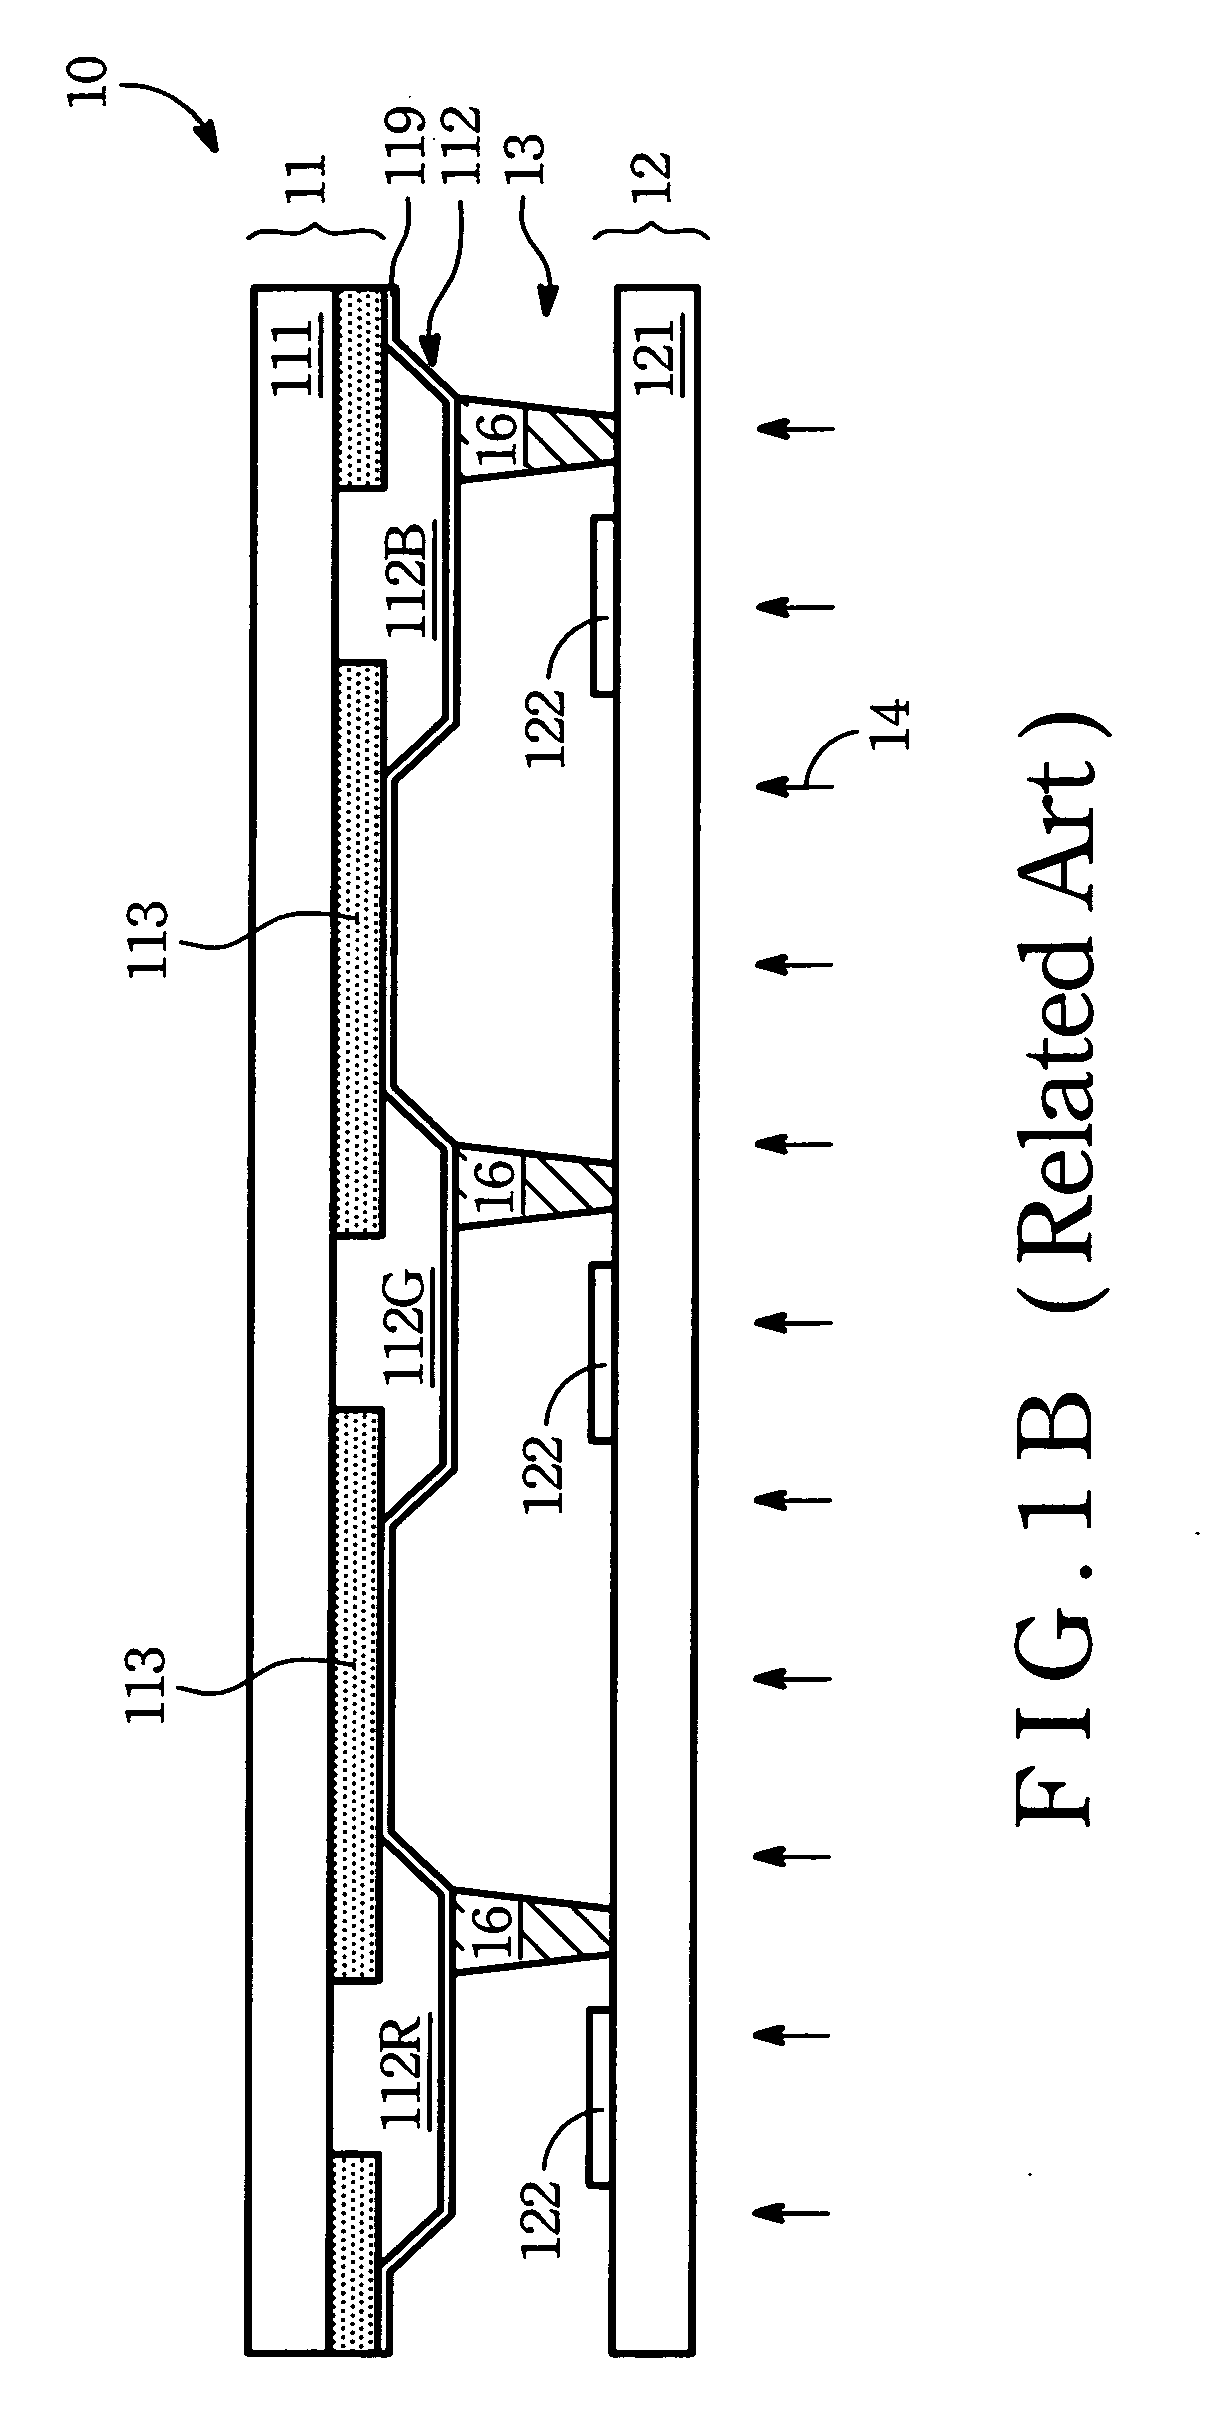 Display panel and color filter therein